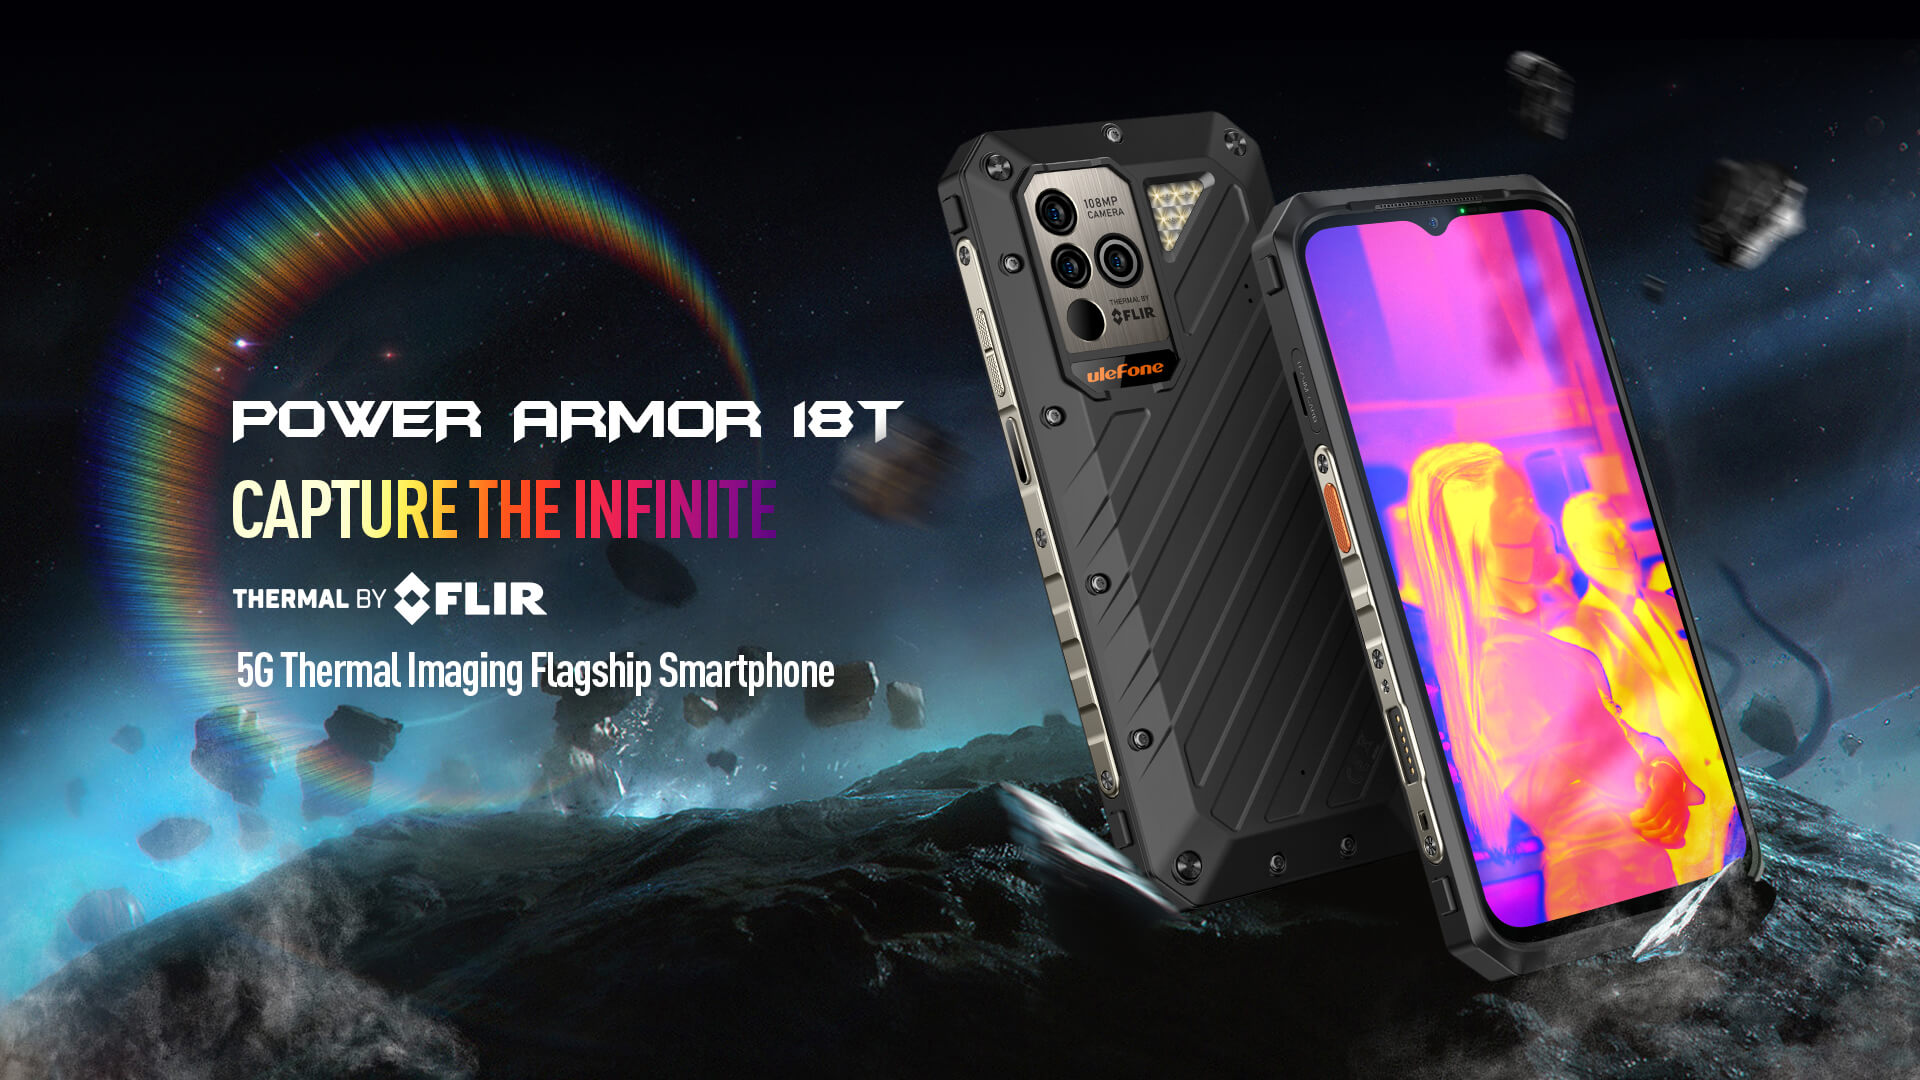 Ulefone Power Armor 18T debuts as its rugged brand's new 5G thermal imaging flagship smartphone - Notebookcheck.net